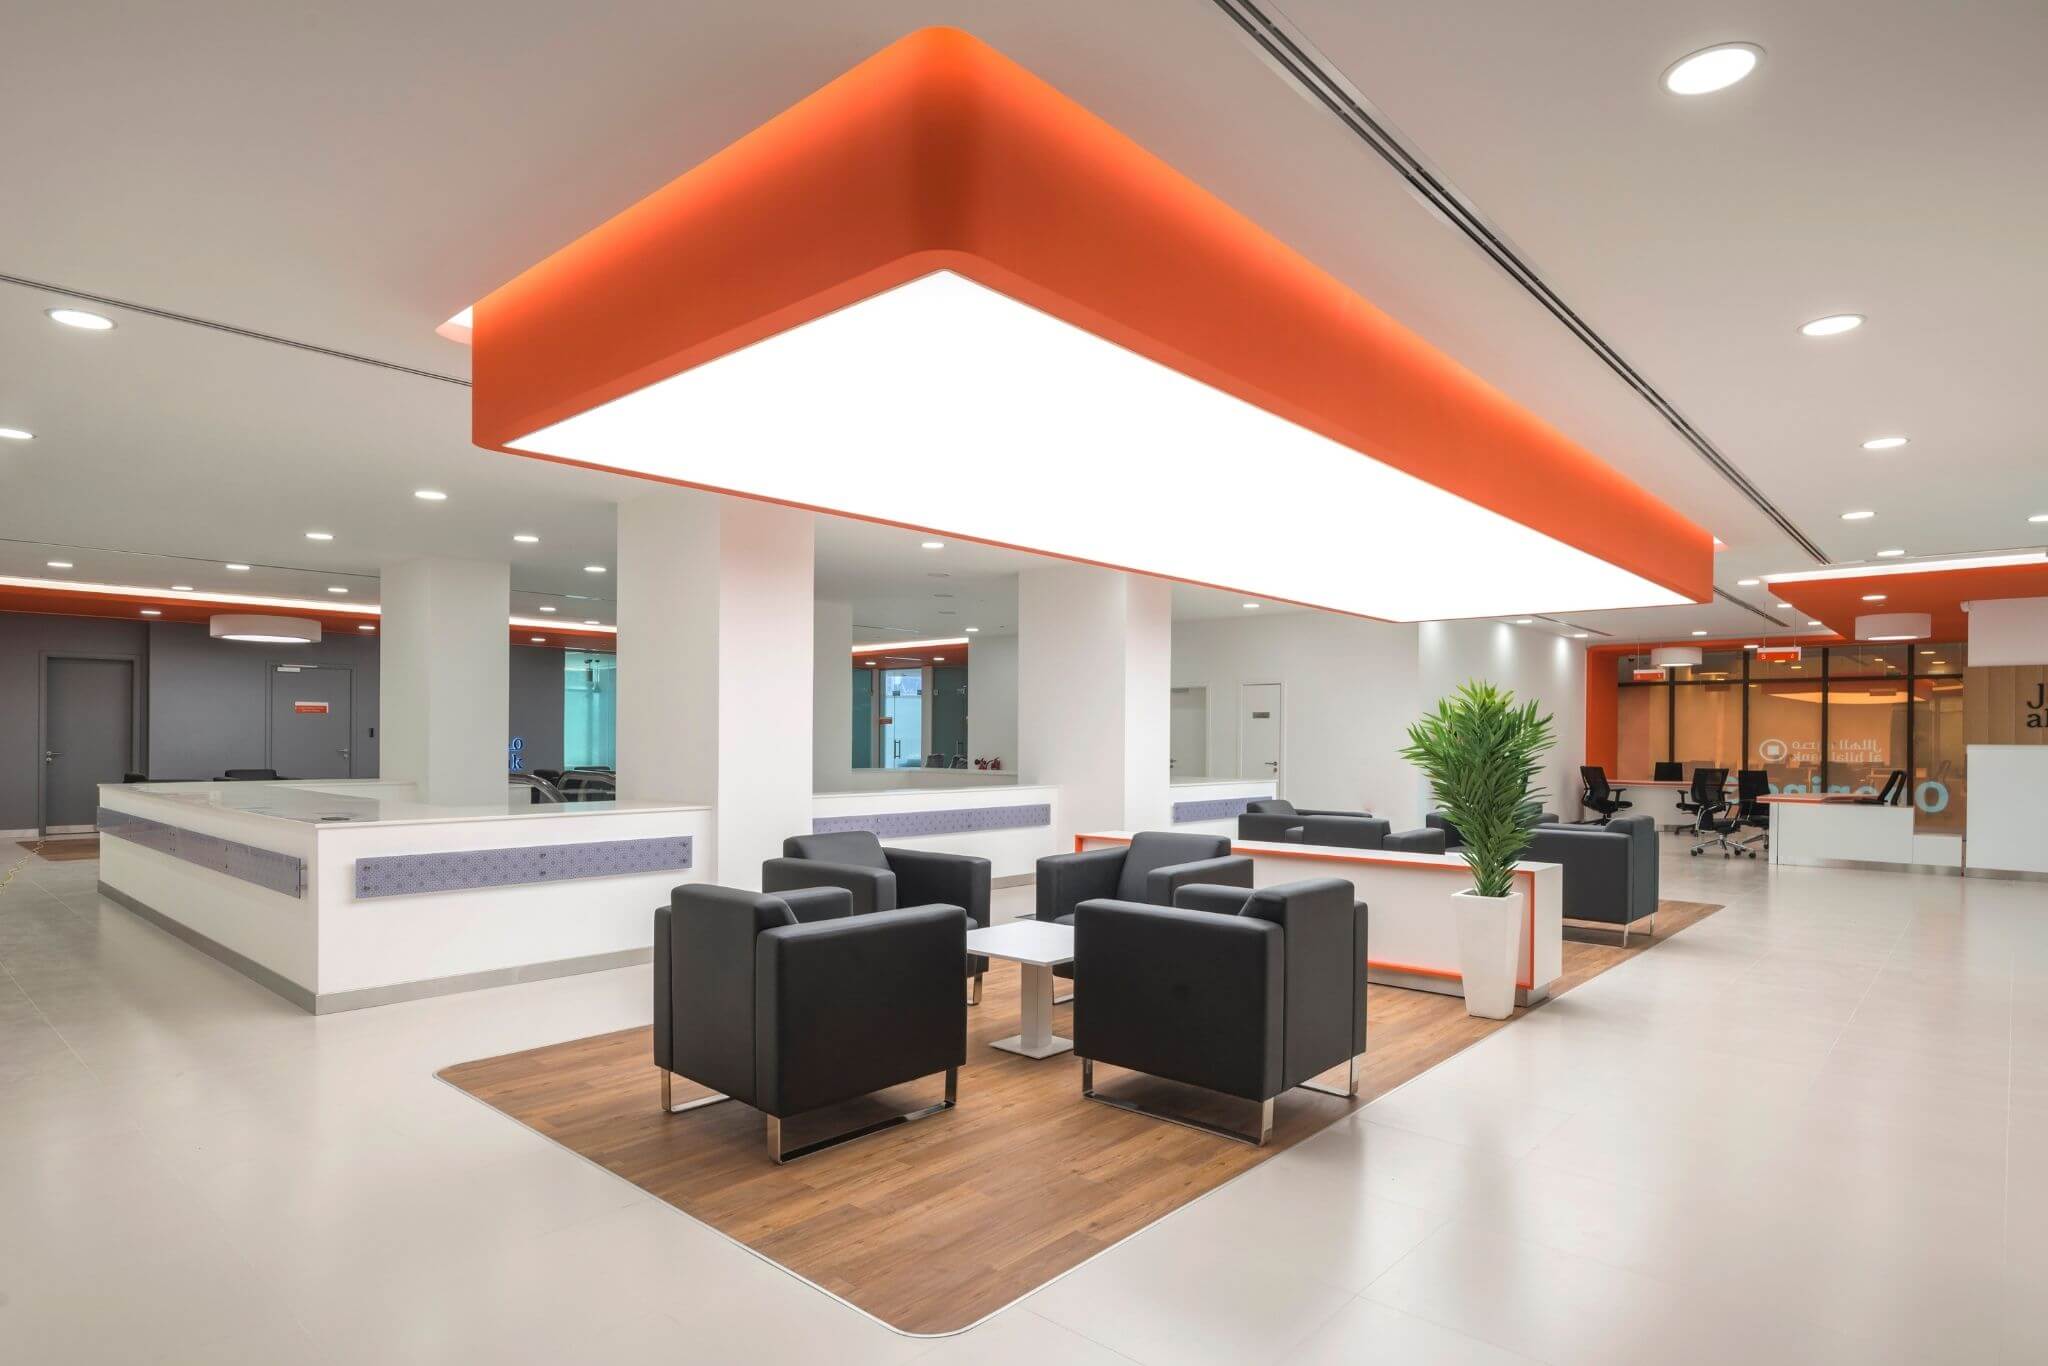 Al Hilal bank in Dubai design and fit out by Motif Interiors0